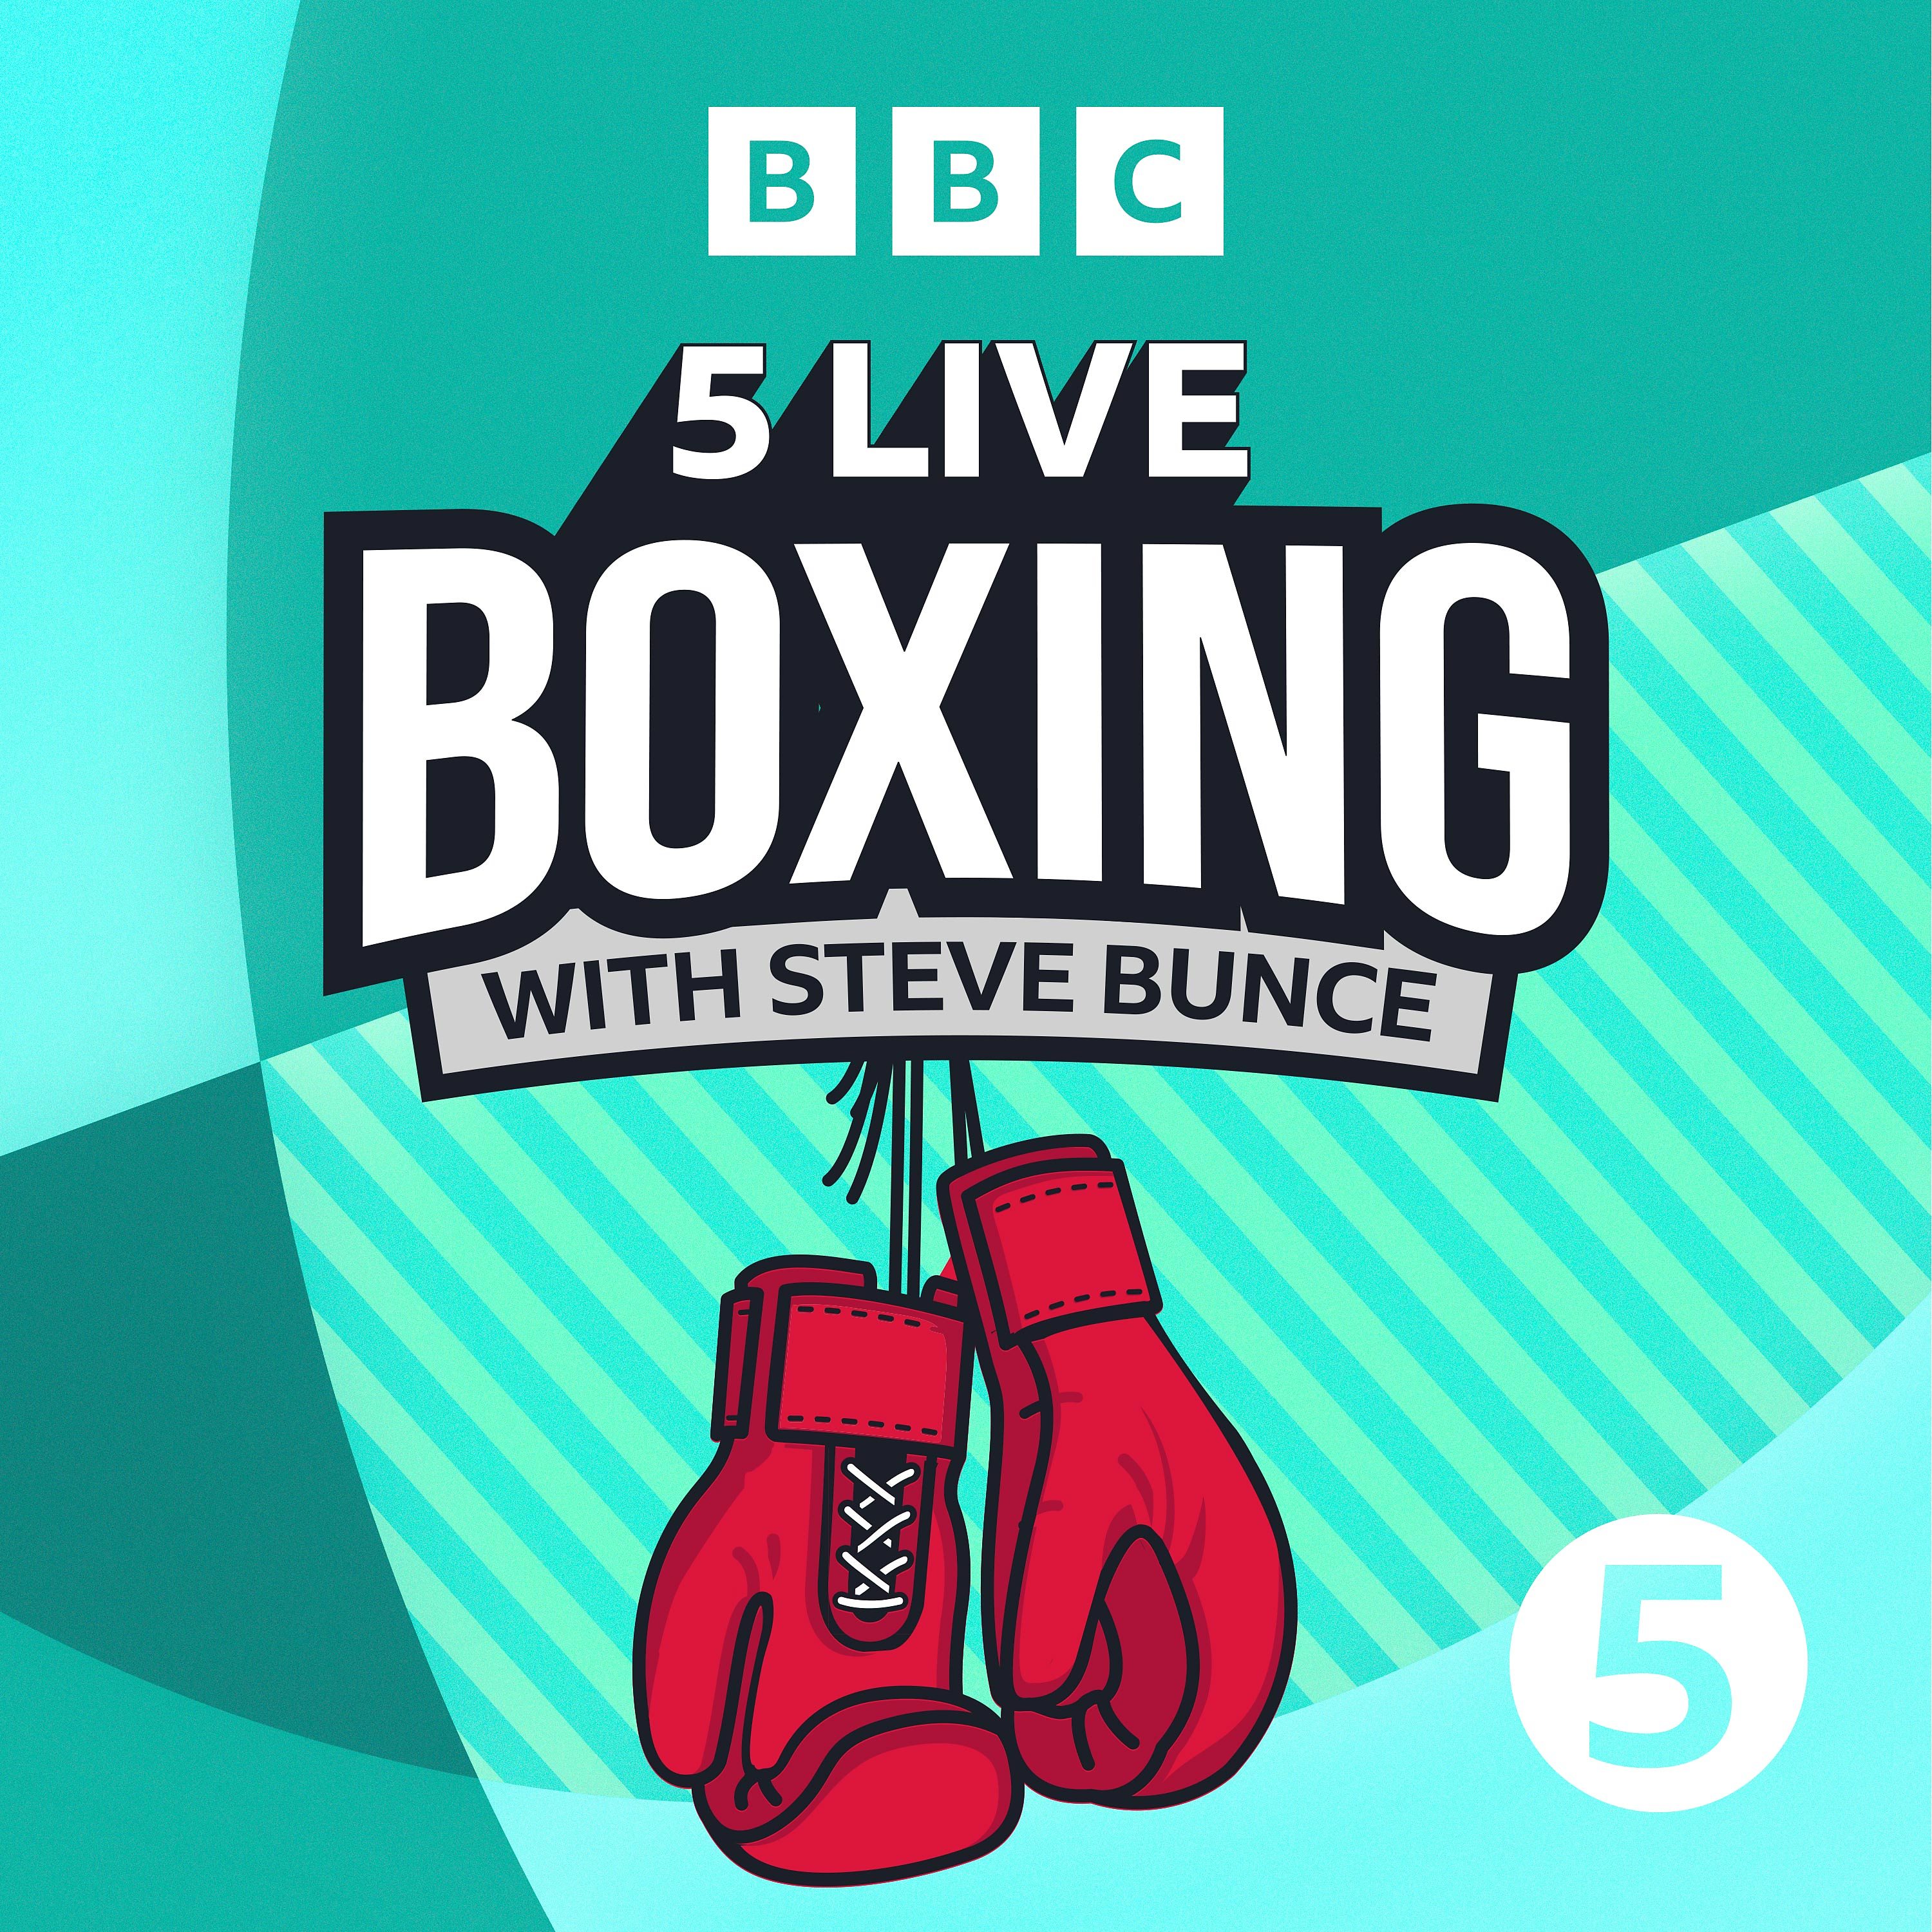 5 Live Boxing with Steve Bunce podcast Listen online for free